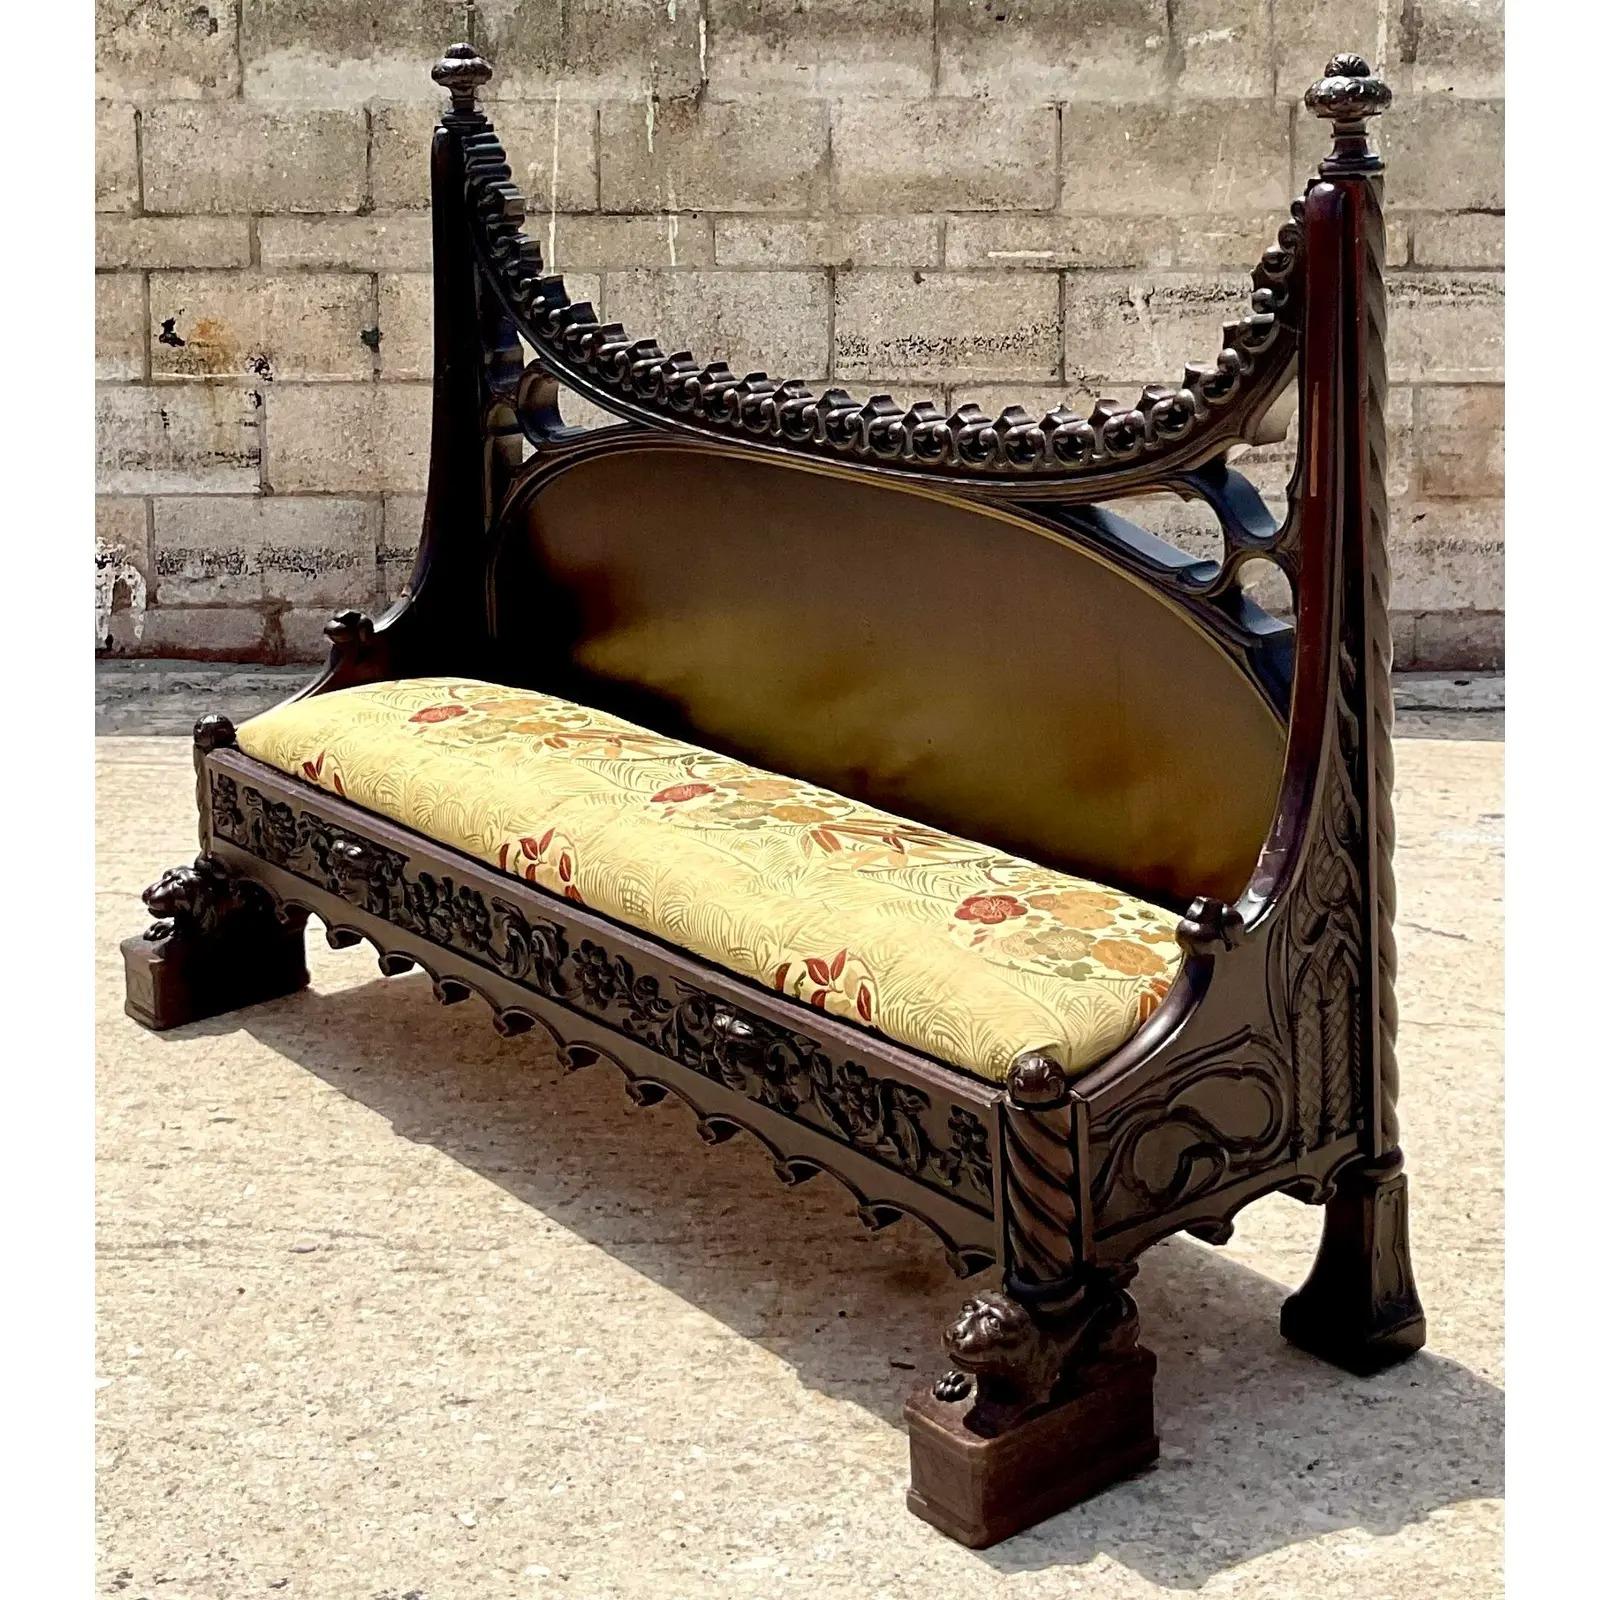 Incredible vintage Neo Gothic bench. Beautiful hand carved details and a striking shape. Acquired from a Palm Beach estate.